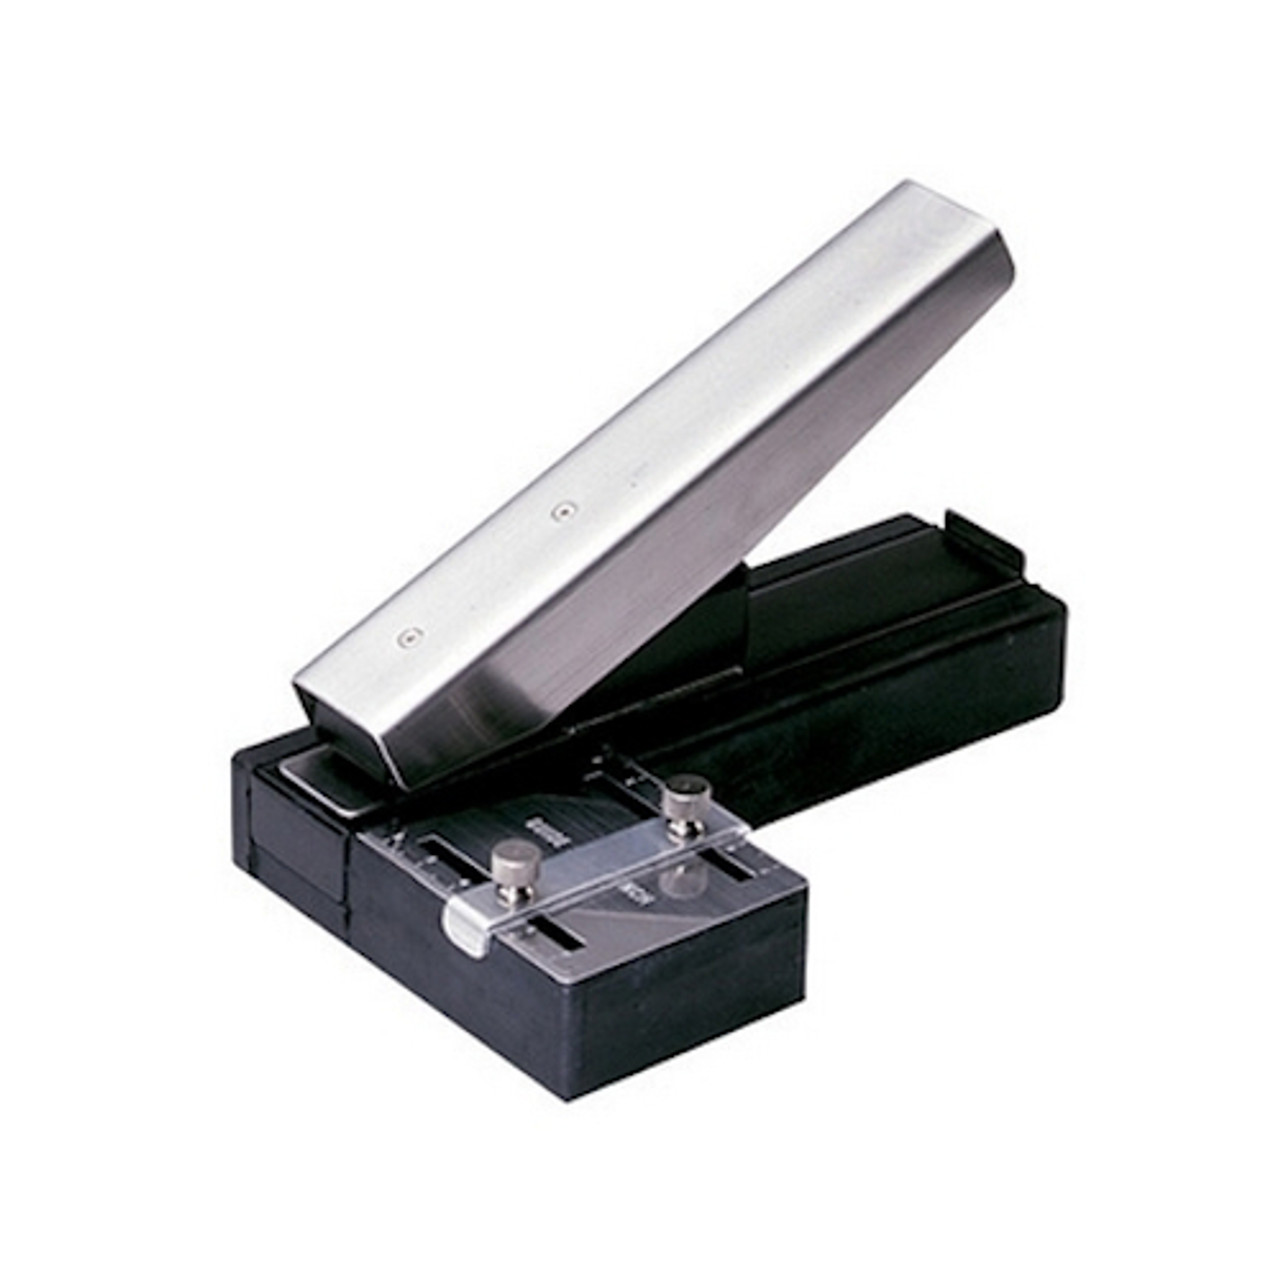 Slot Puncher, Badge Hole Punch for Id Card, PVC Slot and Paper, Heavy-Duty  Hole Punch for Pro Use